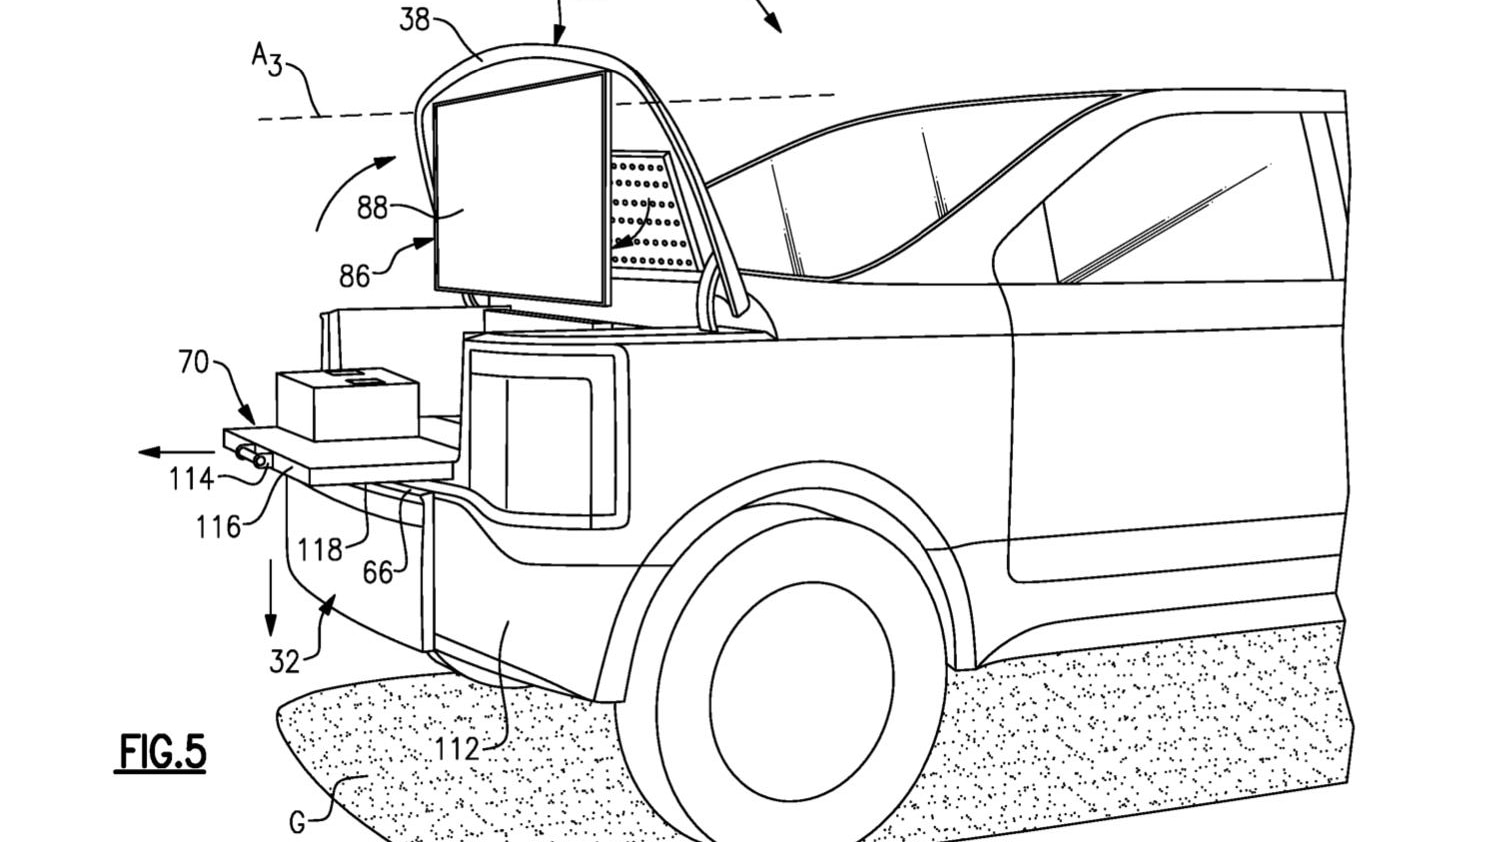 Ford frunk screen mount patent image